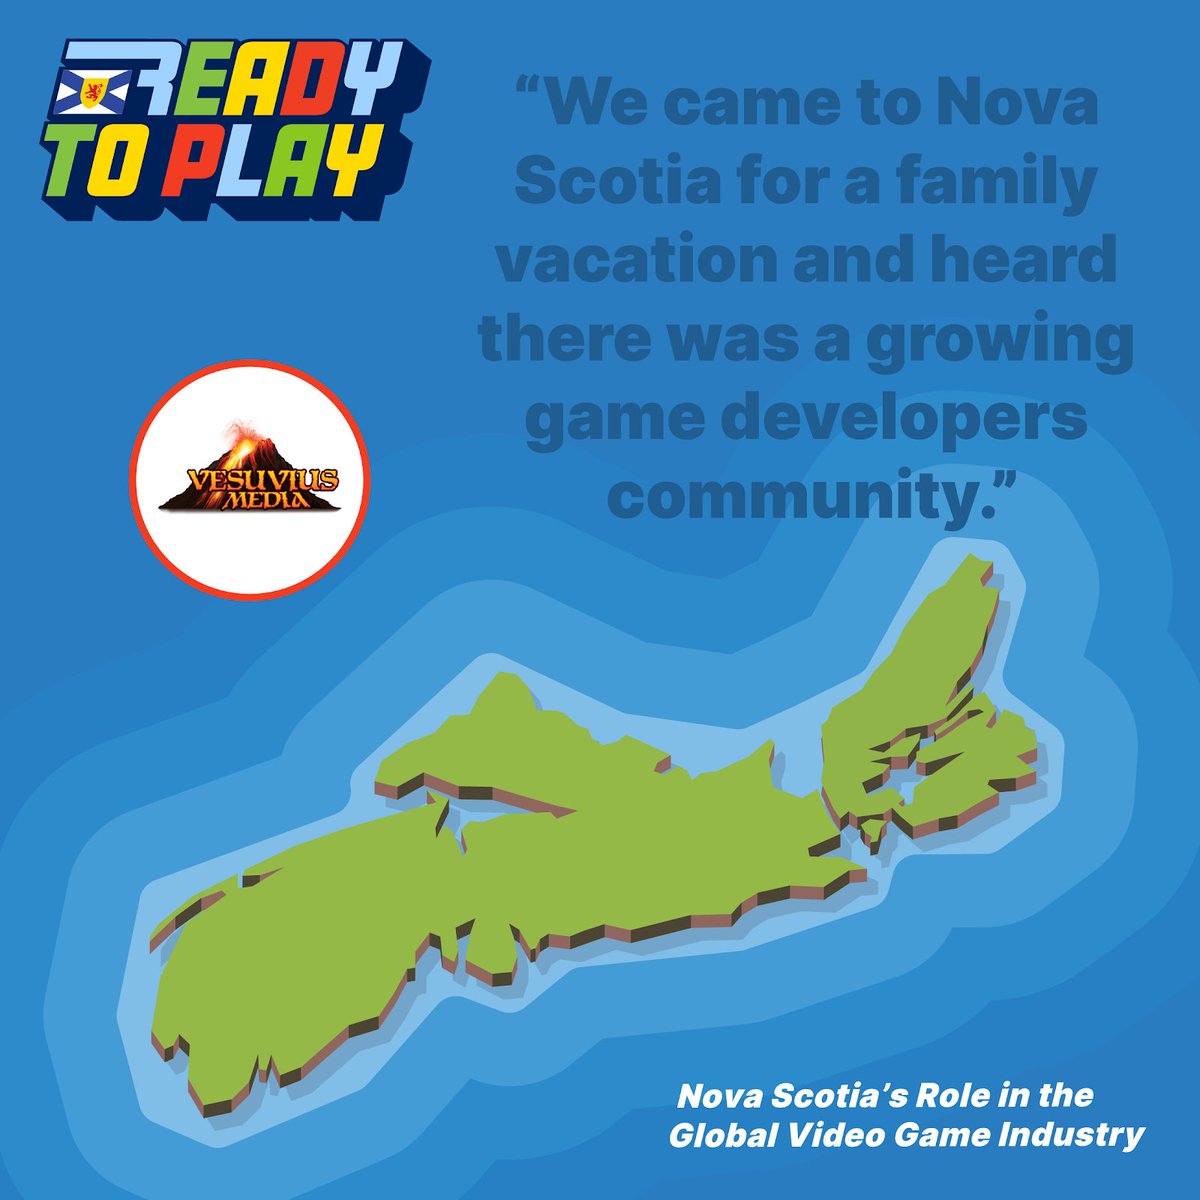 🚀 Discover why @Vesuvius_Media expanded to Nova Scotia from Greece. It's all about Nova Scotia's gaming culture, where collaboration reigns and ideas flow freely, powering growth and innovation. 'Ready to Play' is on view until June 23 @DigitalNS @ISNS_hfx @InvestNS_